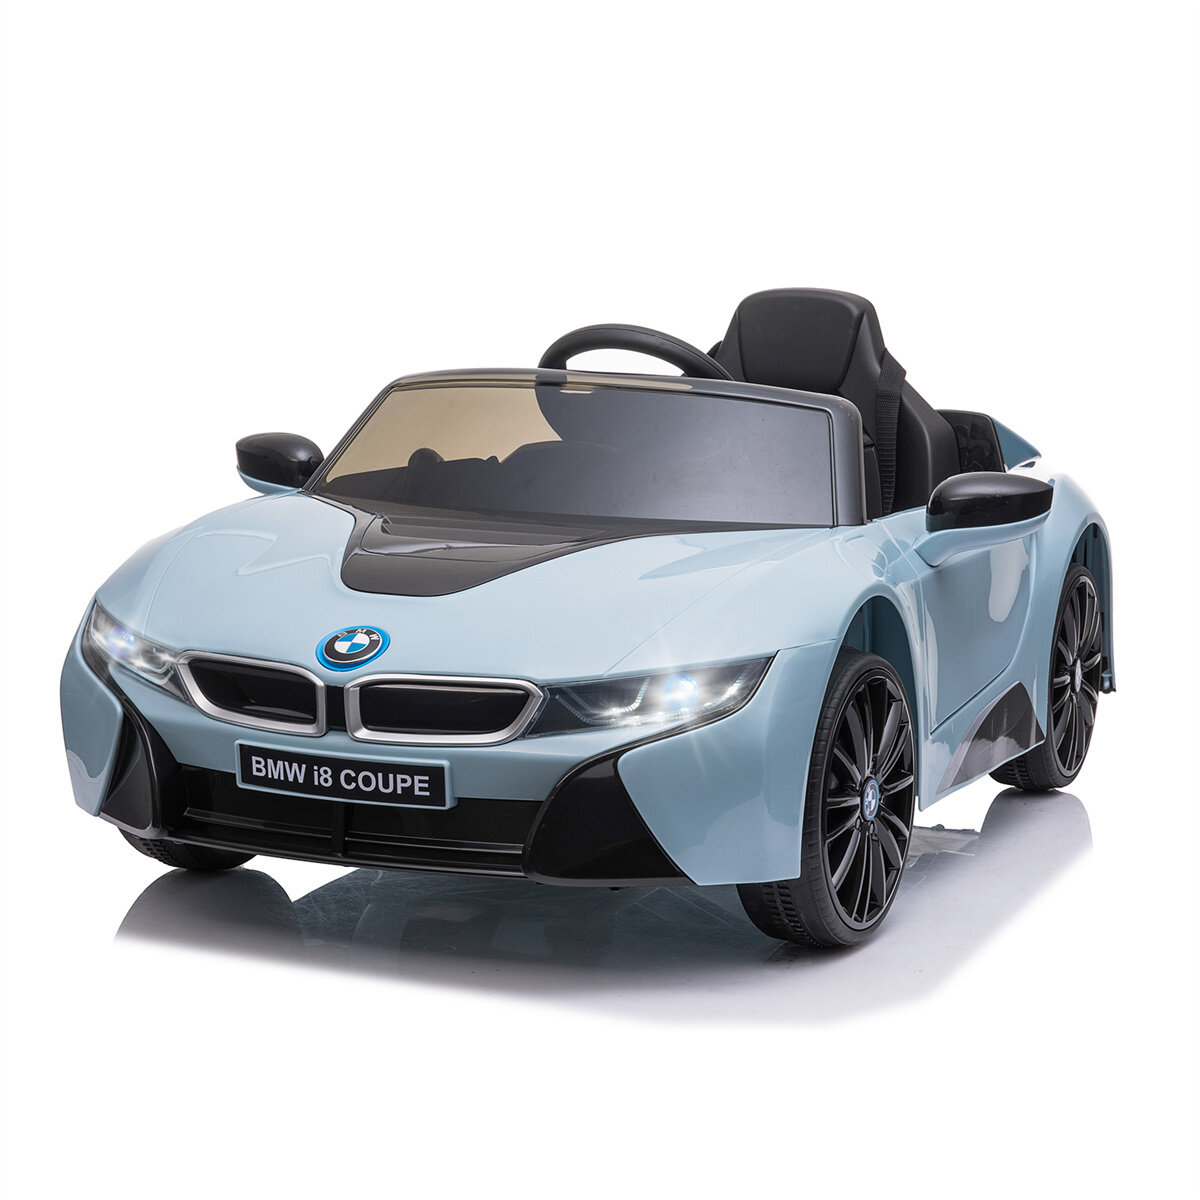 

[EU Direct] ELJET 12V 4.5AH 70W Kids Ride on Car Licensed i8 COUPE 7km/h Max Speed Safety Rechargeable Battery Powered E